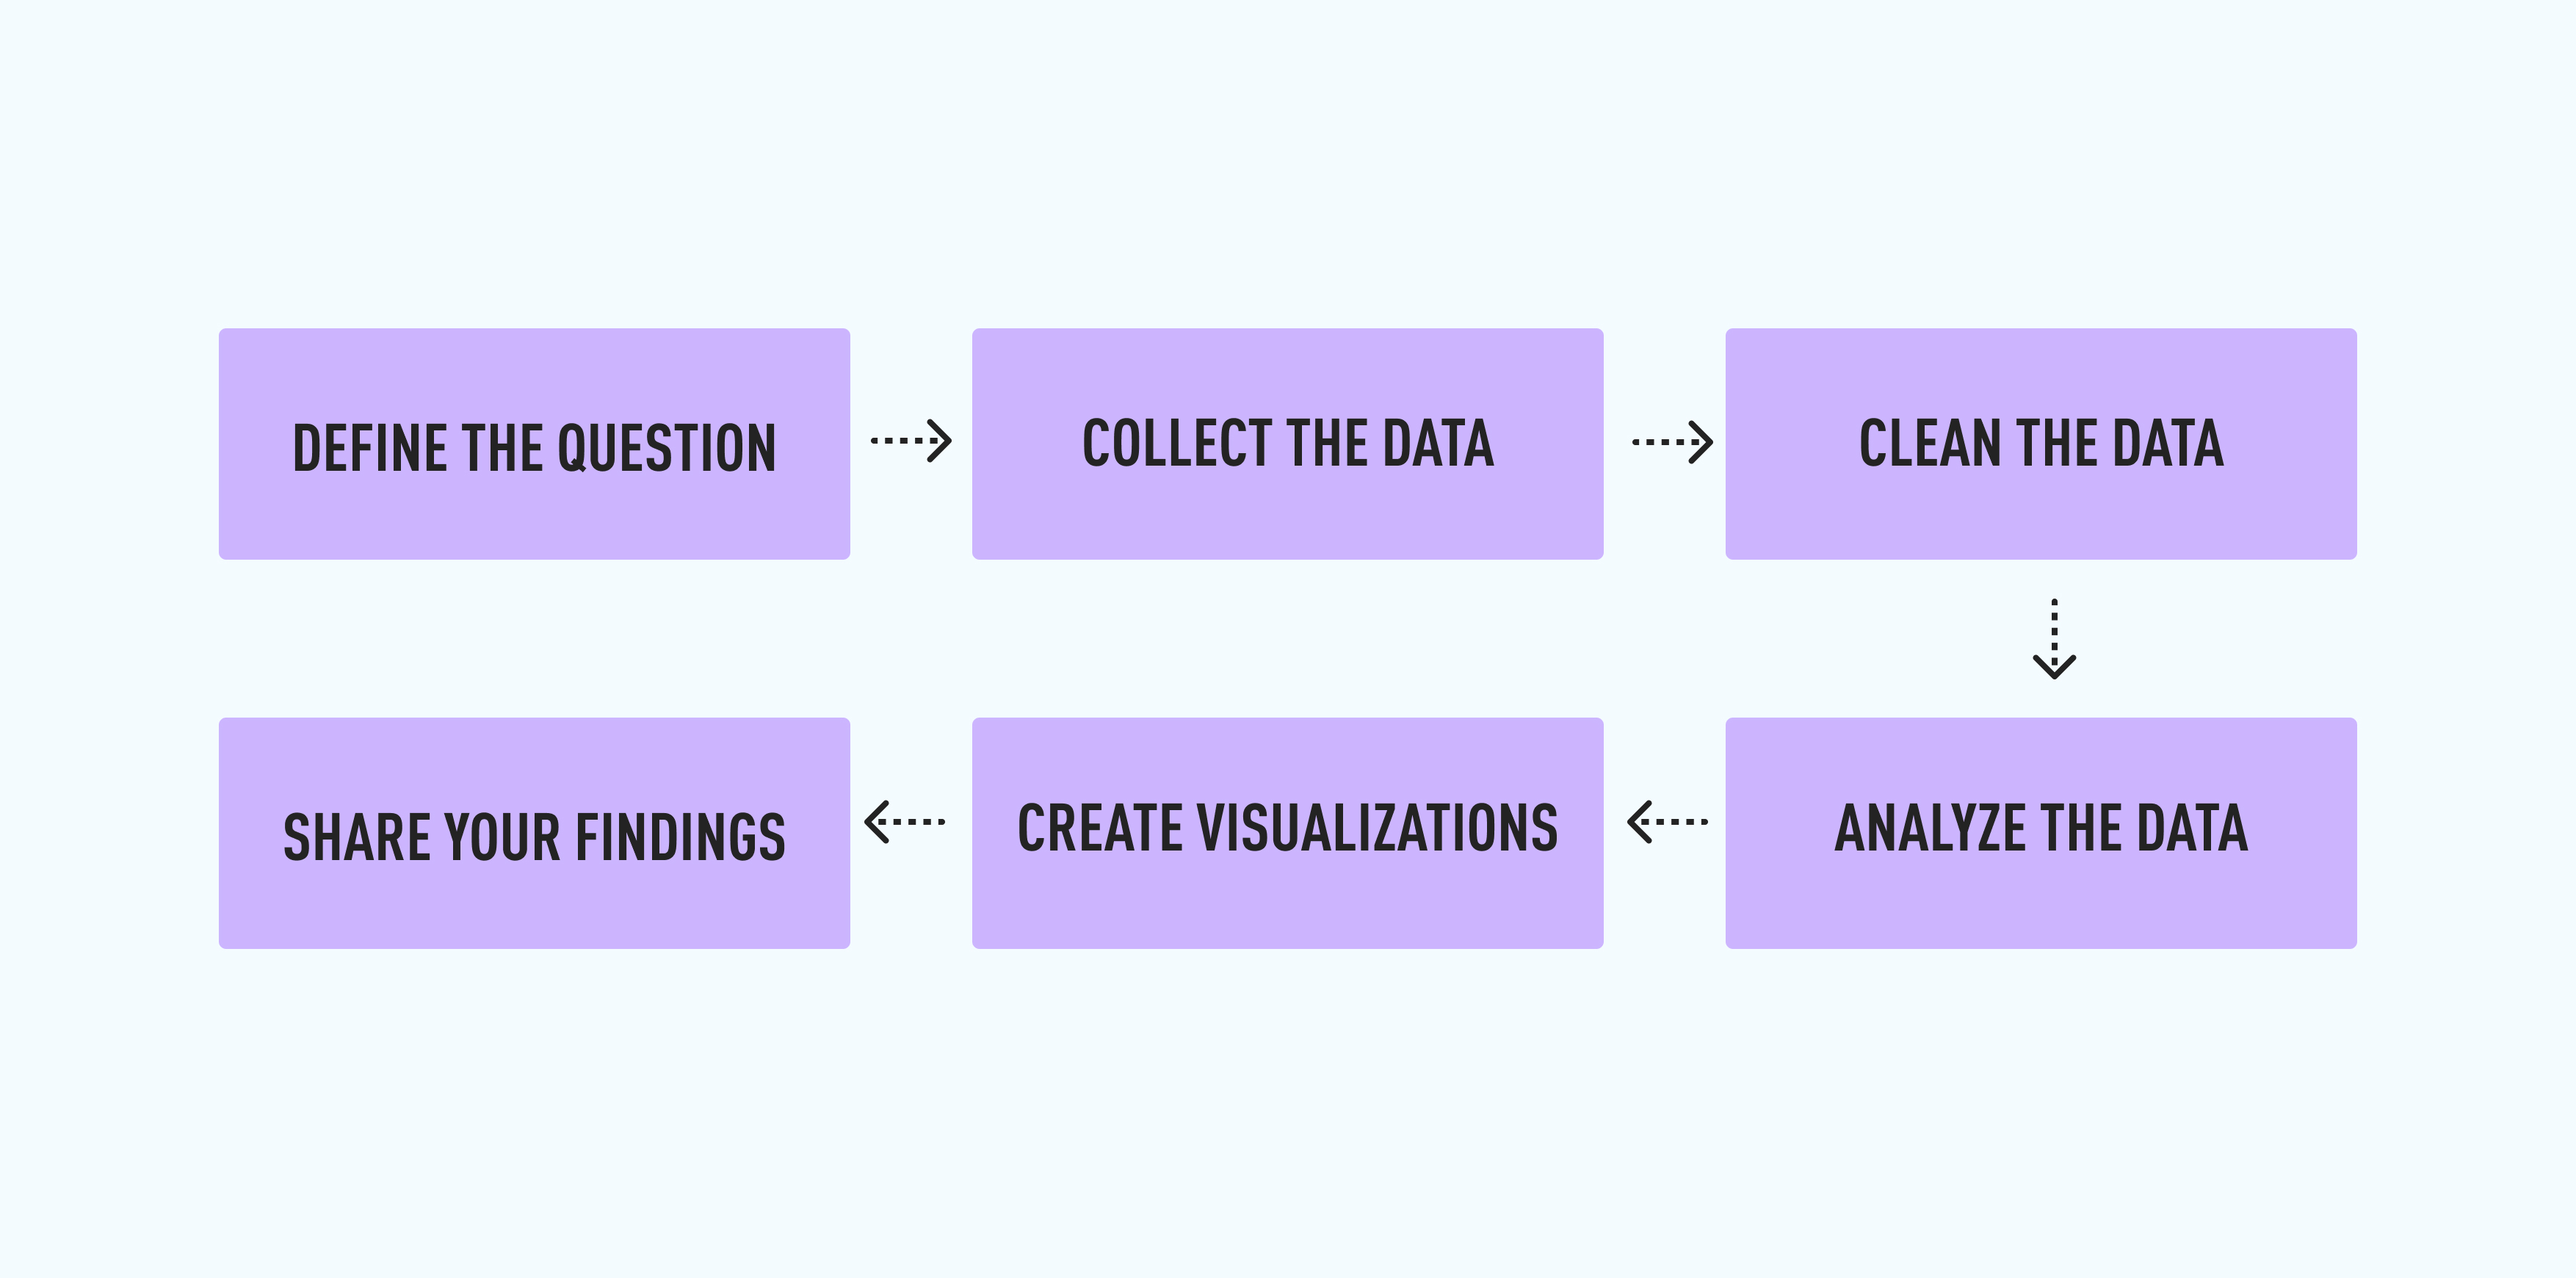 A flow chart of the key steps in the data analysis process: Define the question, collect the data, clean the data, analyze the data, create visualizations, and share findings.